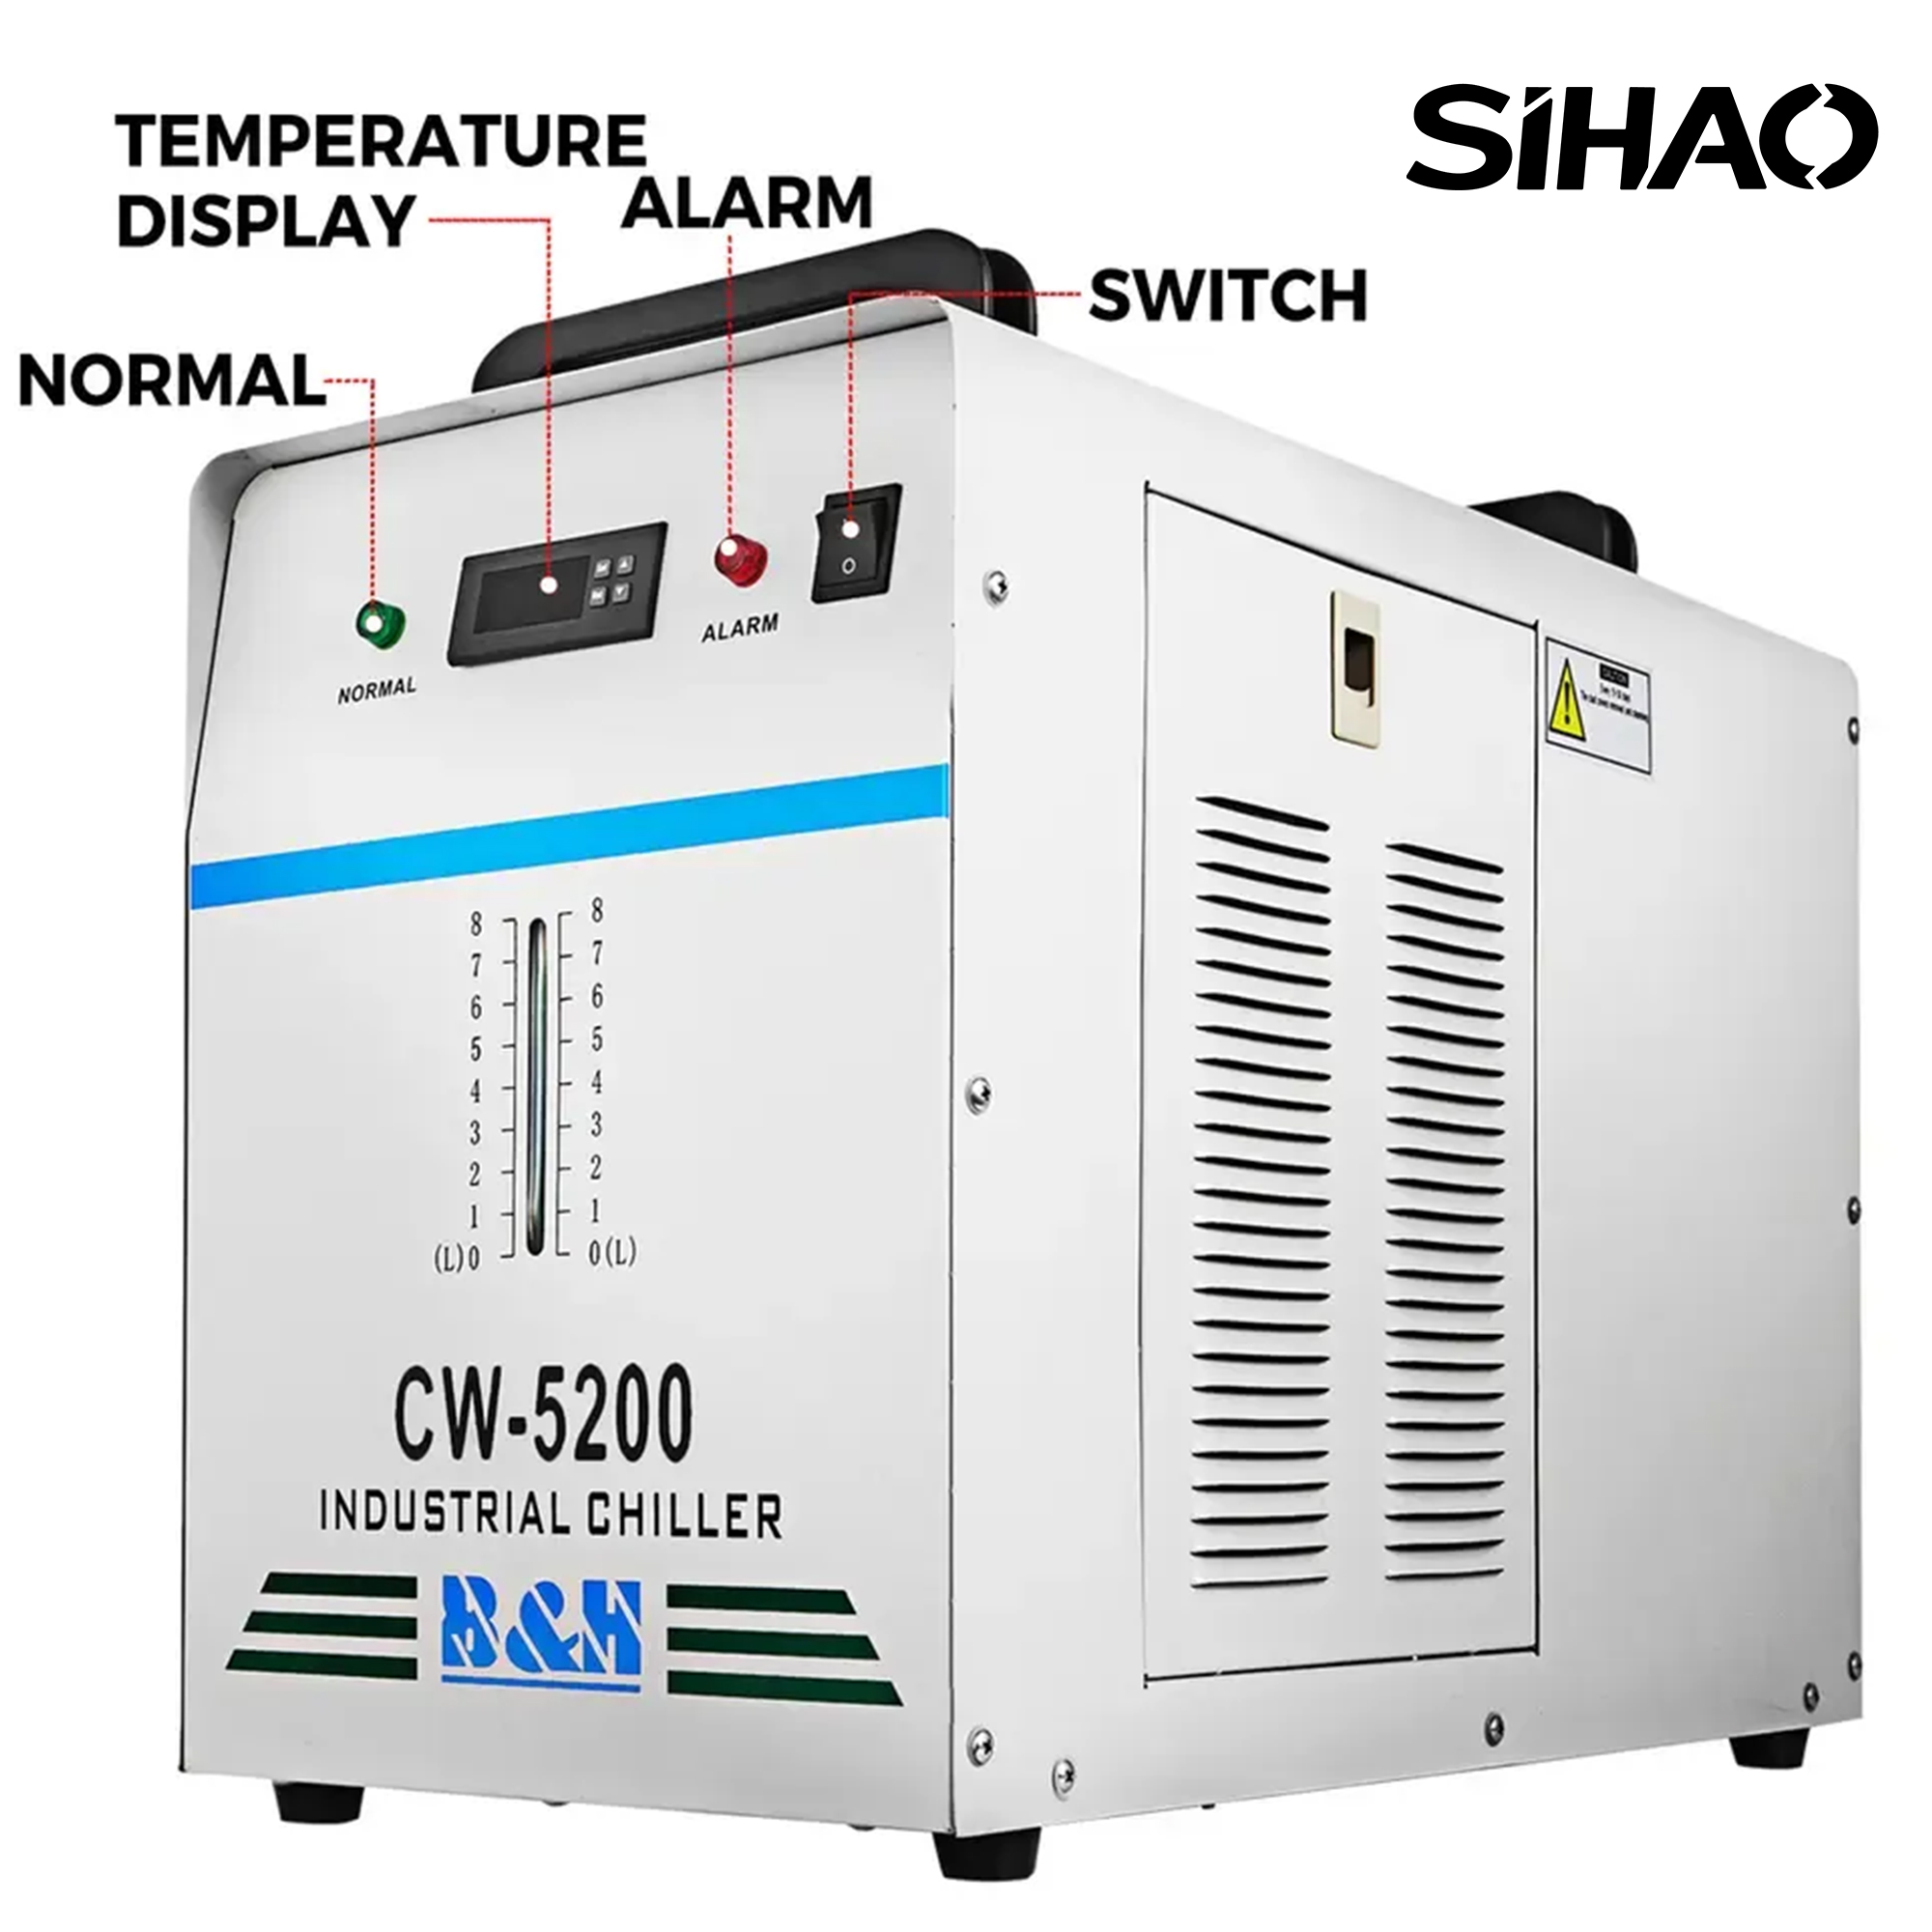 SIHAO Industrial water chiller